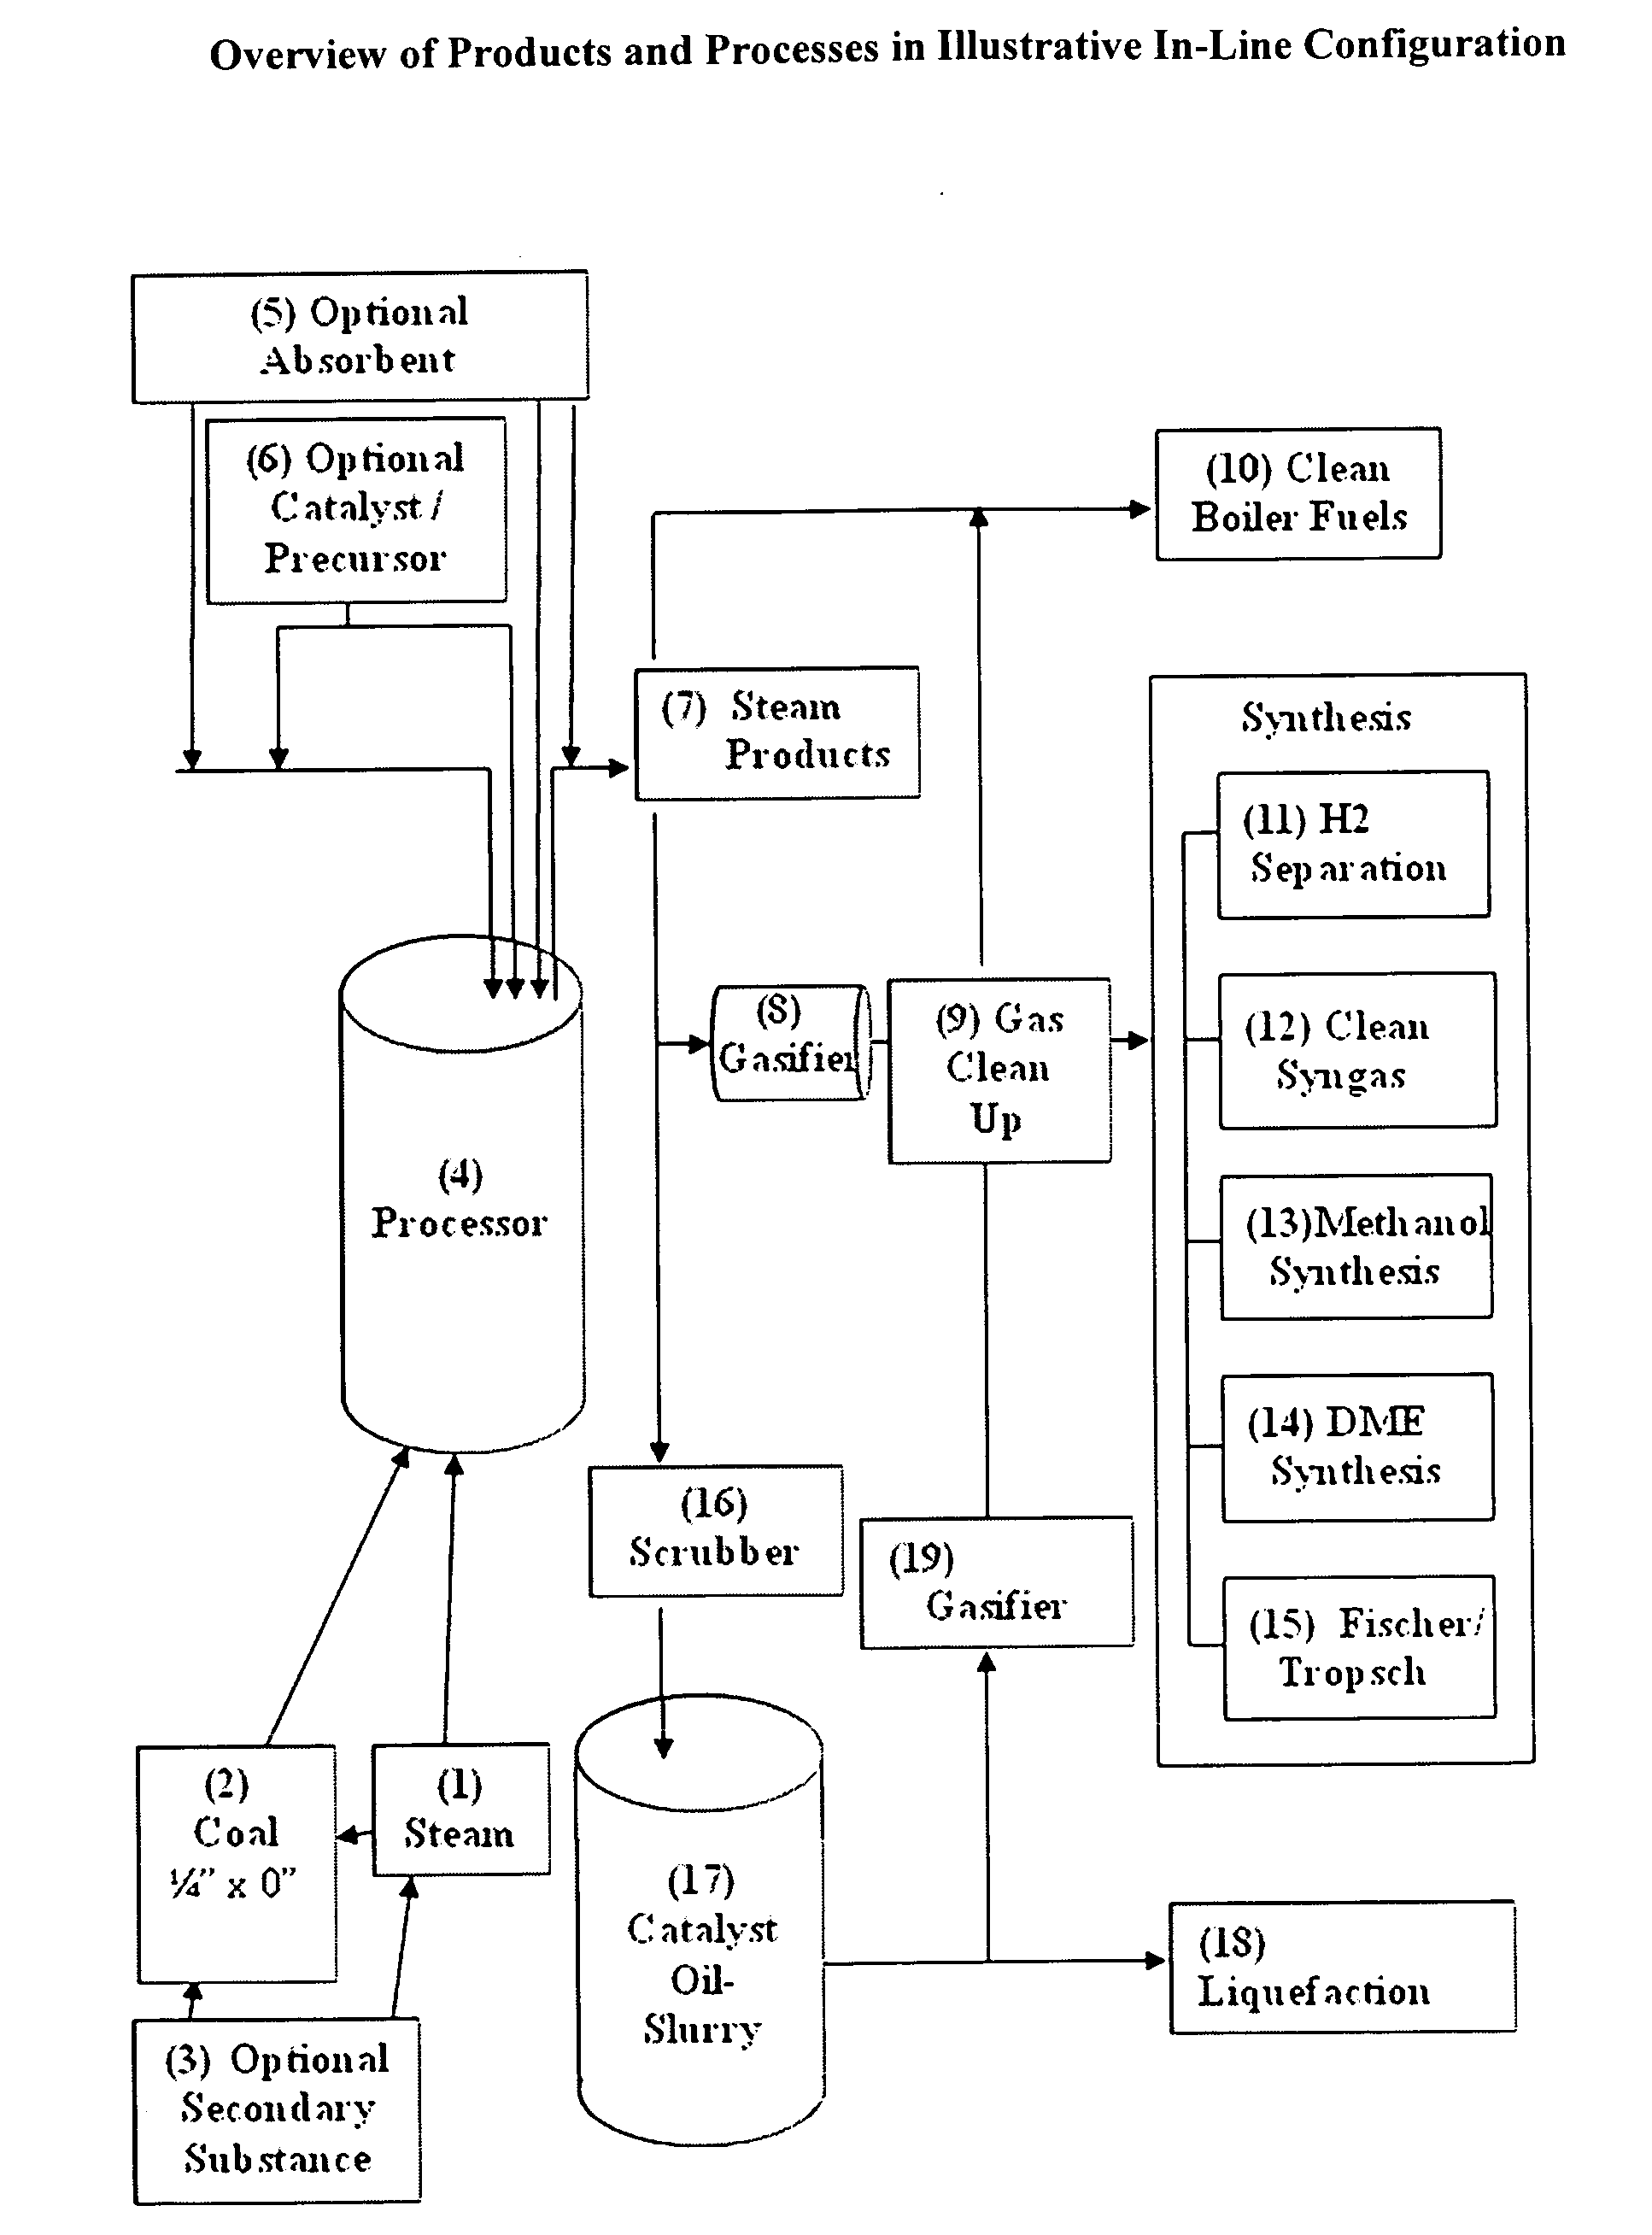 Process for preparing fuel solids for gasification